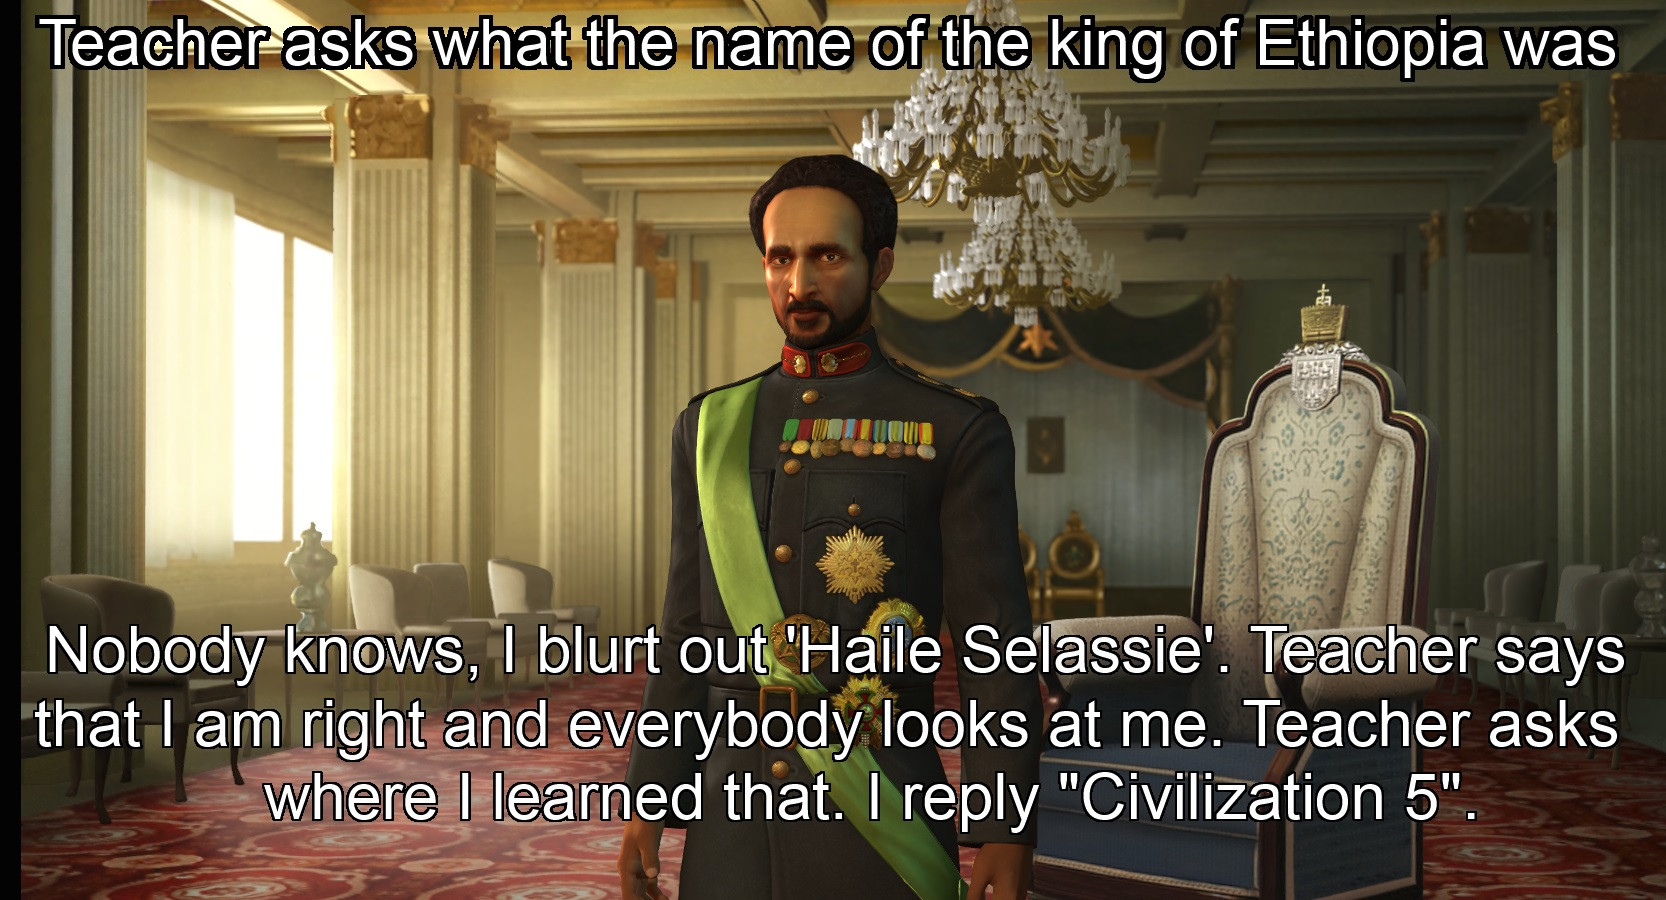 memes civilization 5 - Teacher asks what the name of the king of Ethiopia was Nobody knows, 1 blurt out 'Haile Selassie'. Teacher says that I am right and everybody looks at me. Teacher asks where I learned that. I "Civilization 5".